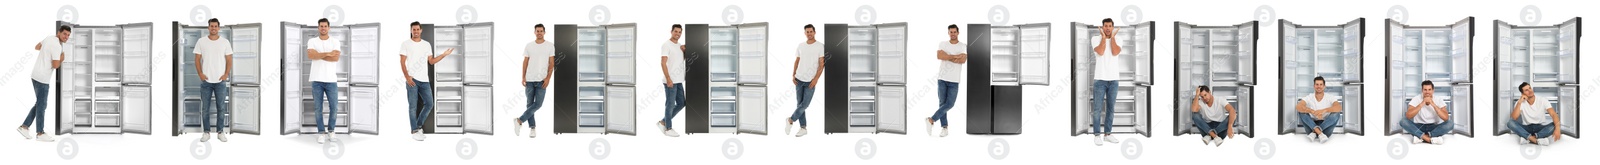 Image of Collage of man near open empty refrigerators on white background